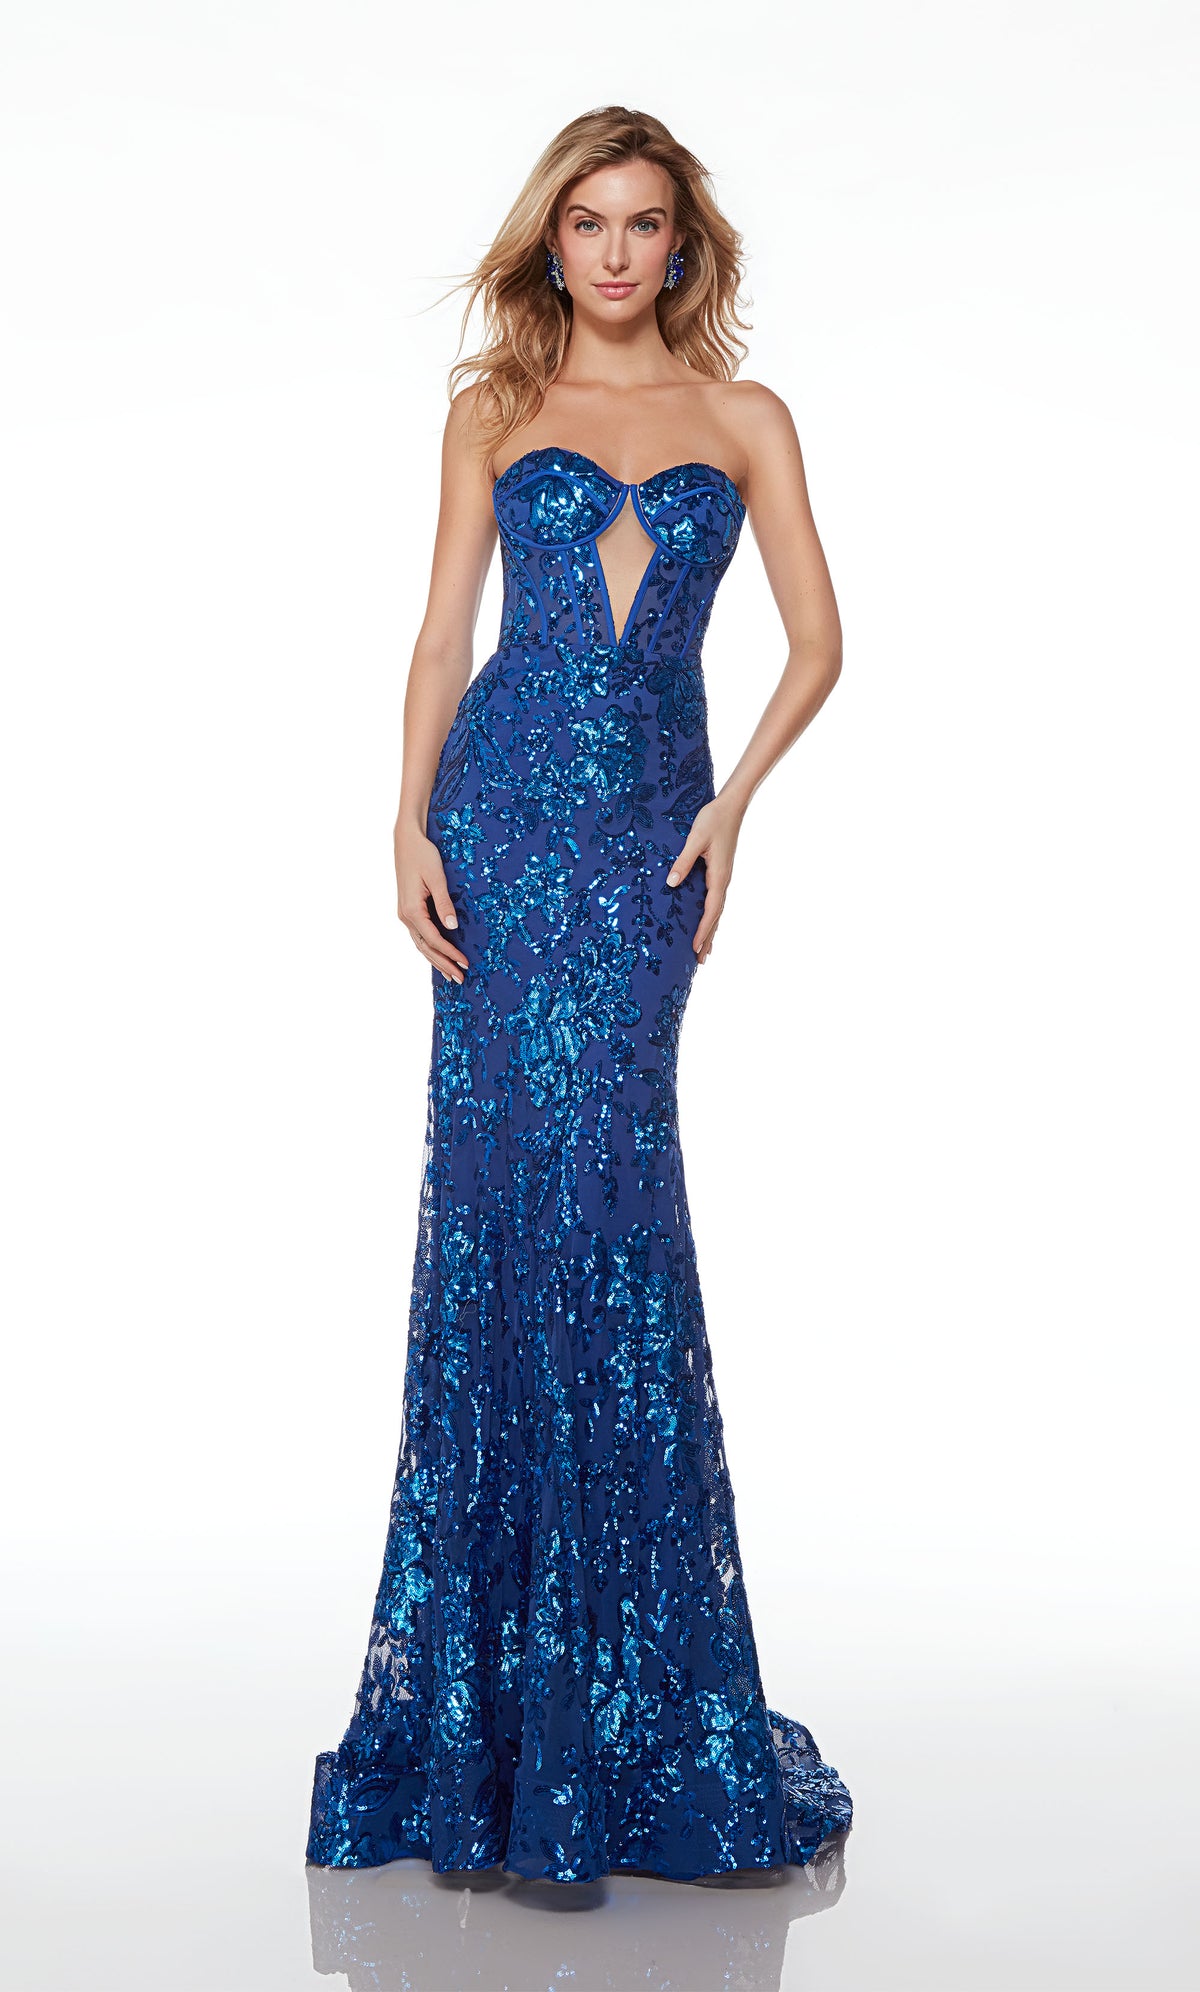 Strapless royal blue prom dress featuring an diamond keyhole corset top, lace-up back, train, and iridescent floral sequin designs for an captivating and elegant look.